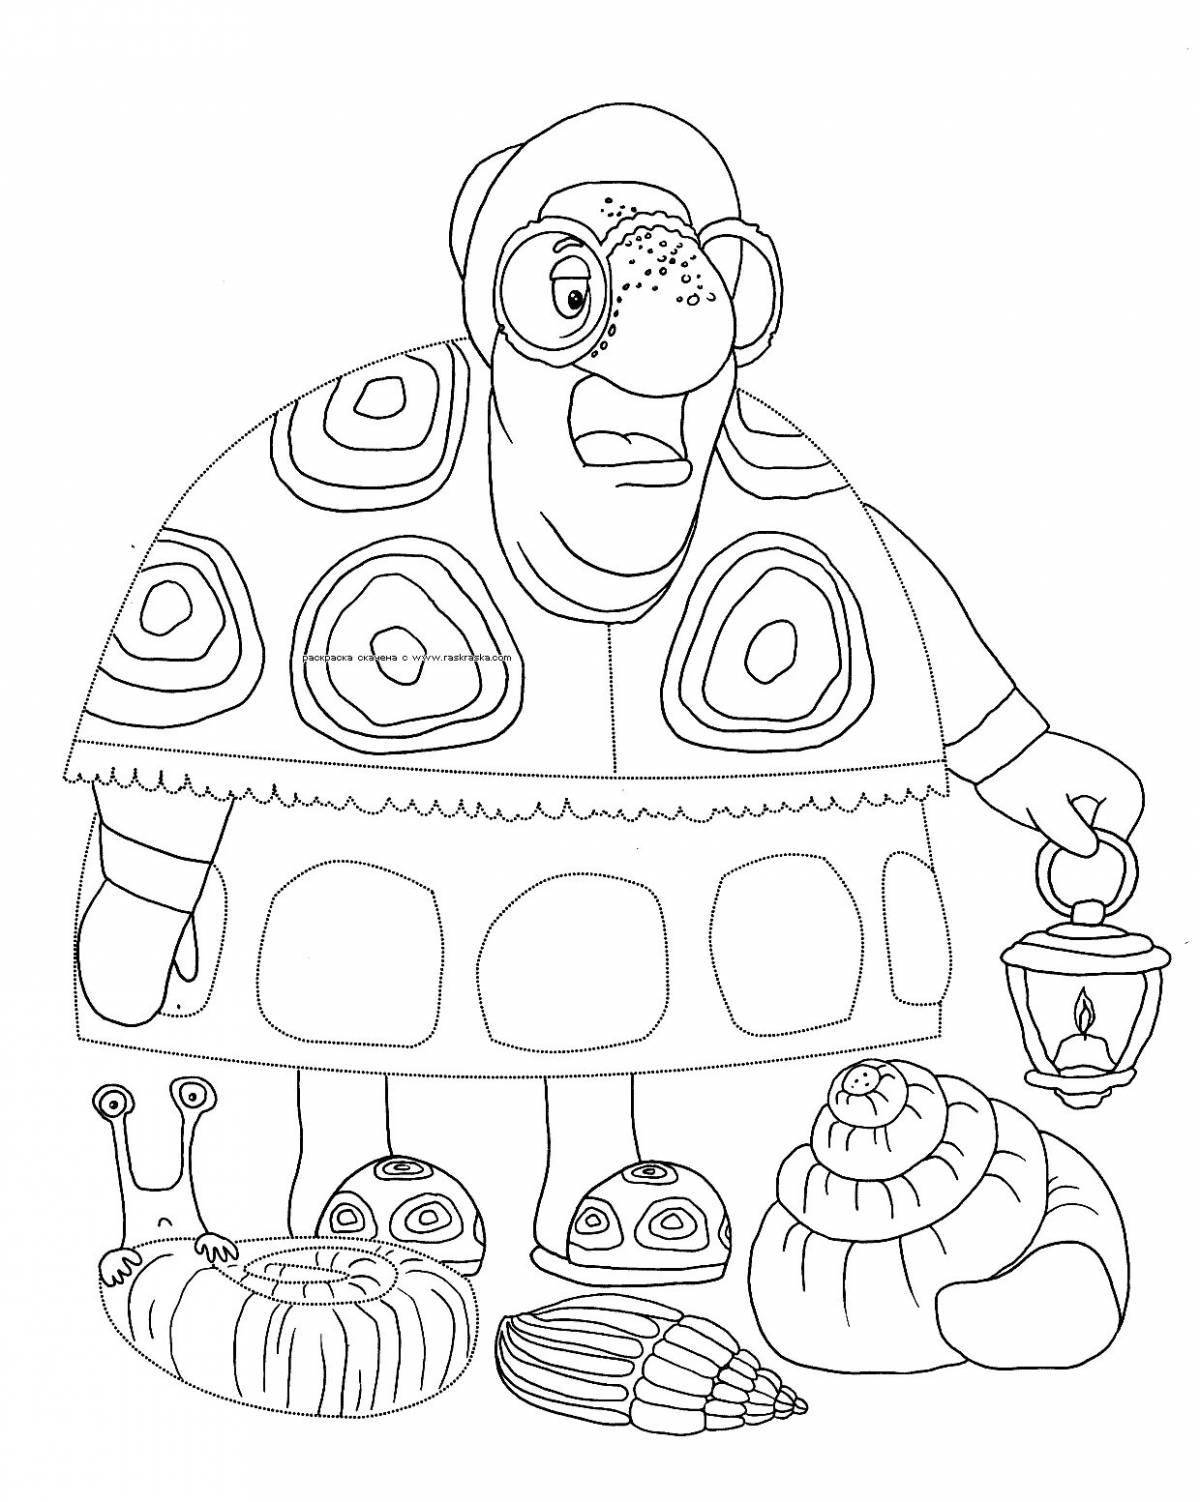 Coloring book wise grandfather